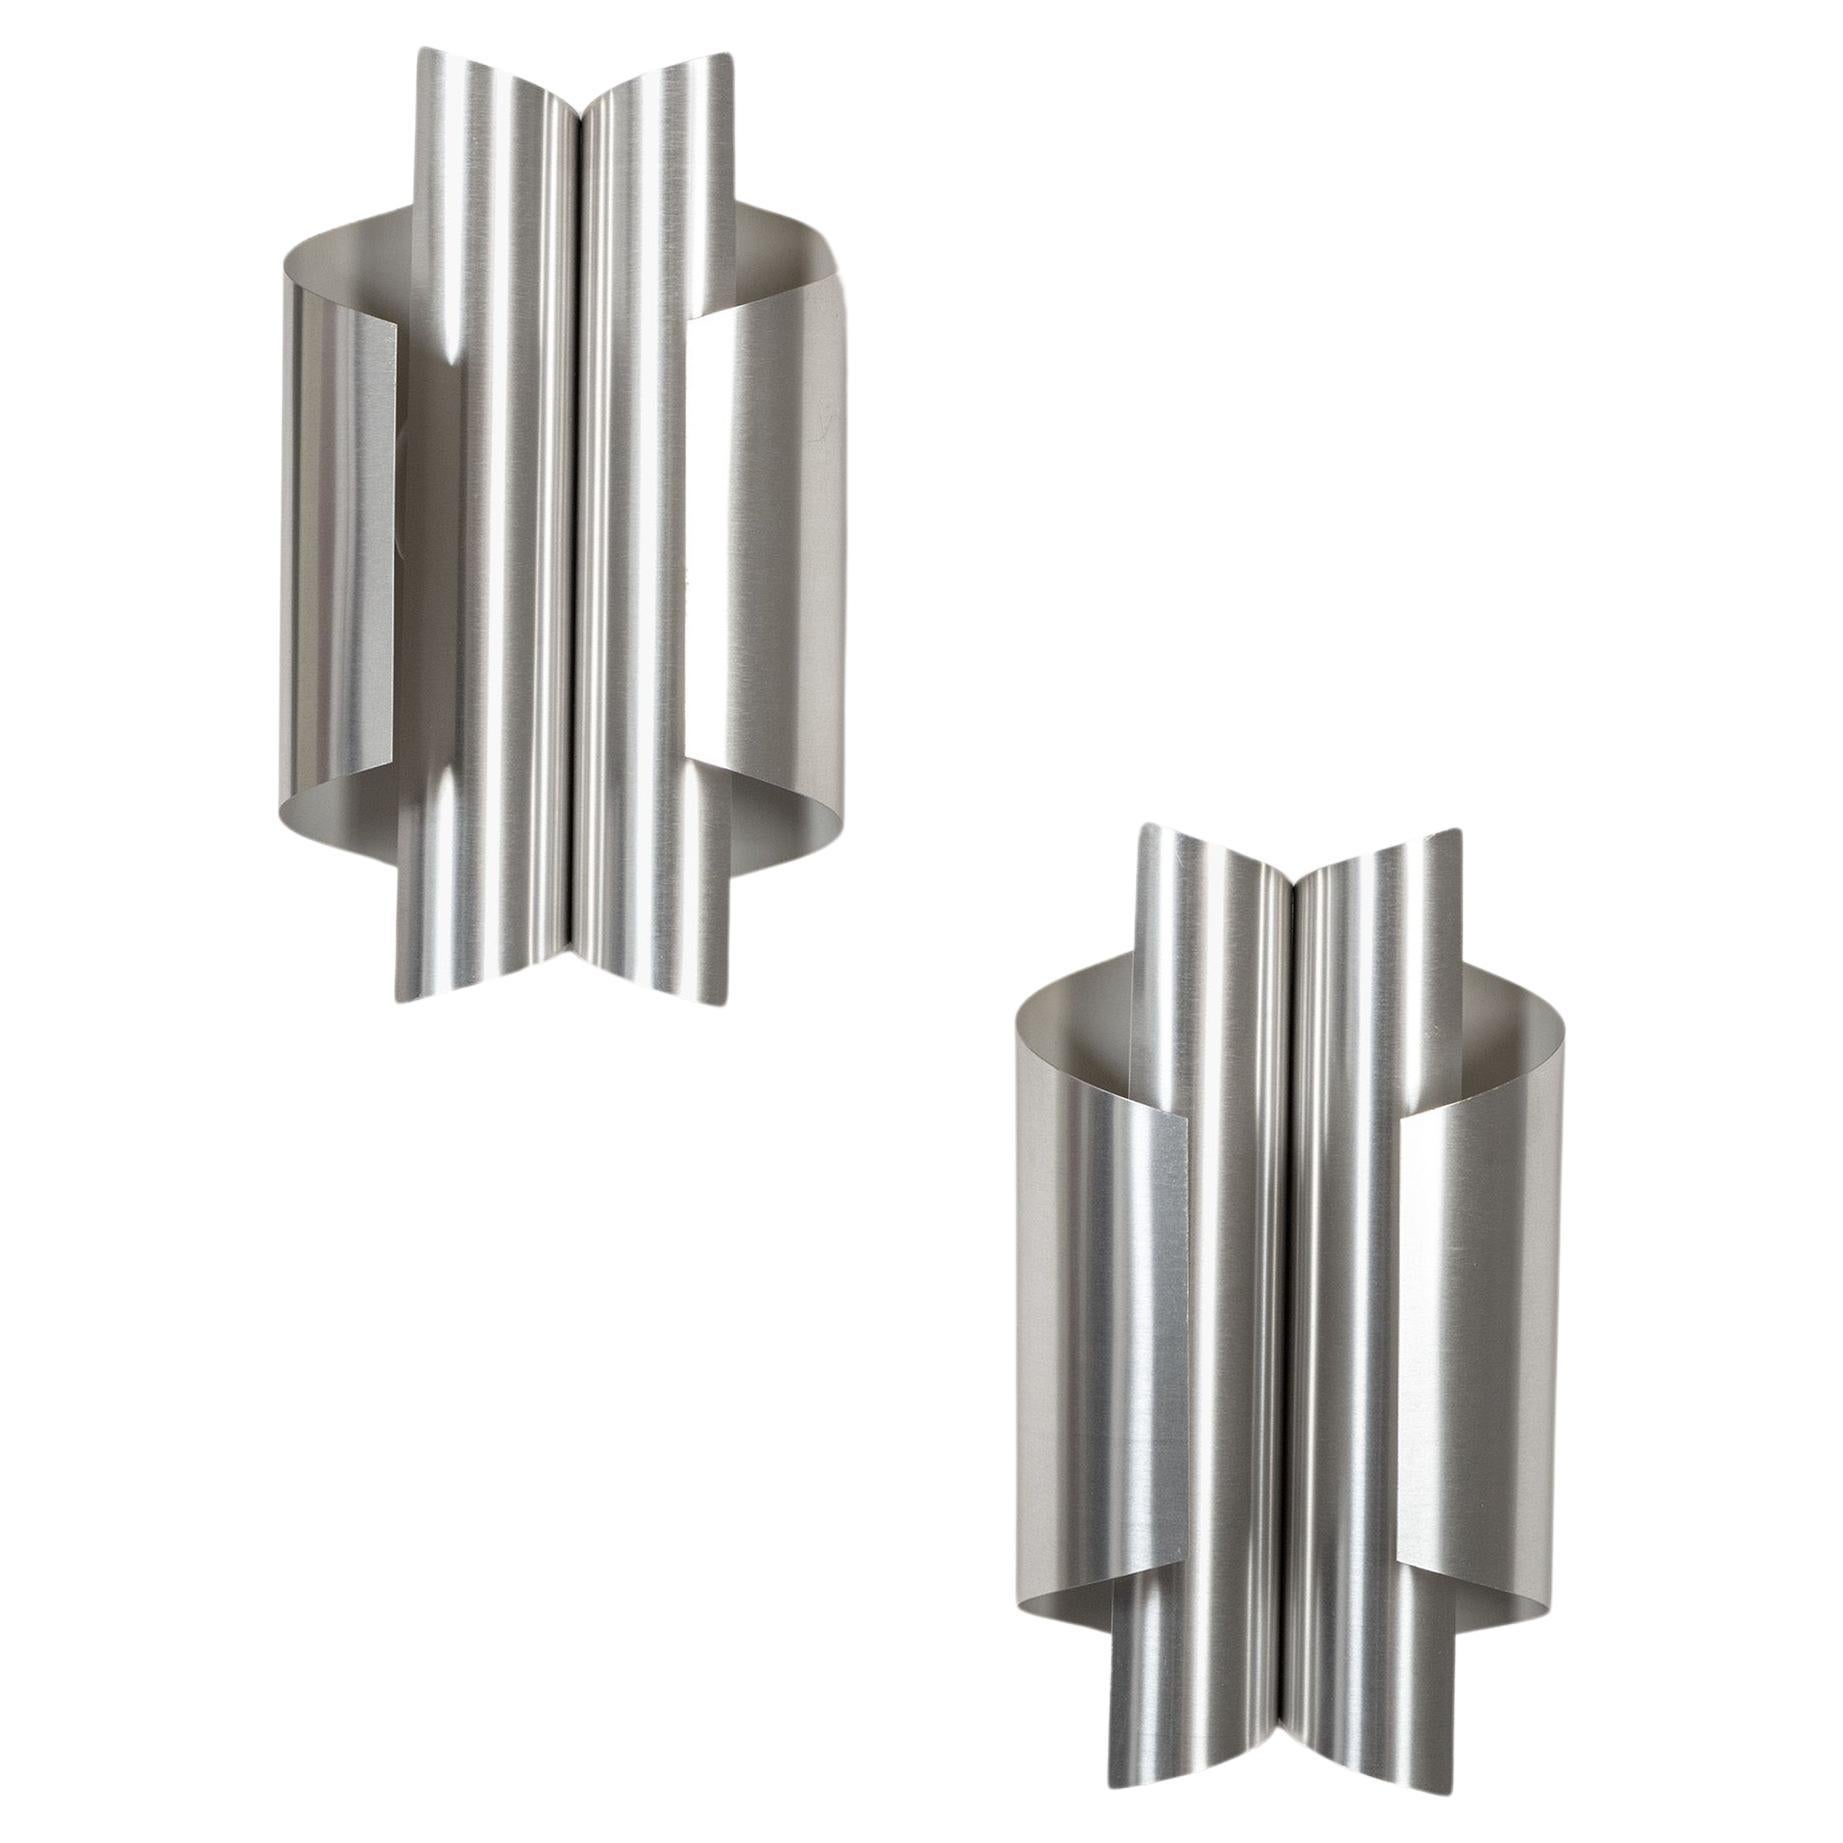 Pair of Sculptural Brushed Aluminium Wall Lights, Italian, 1970s For Sale